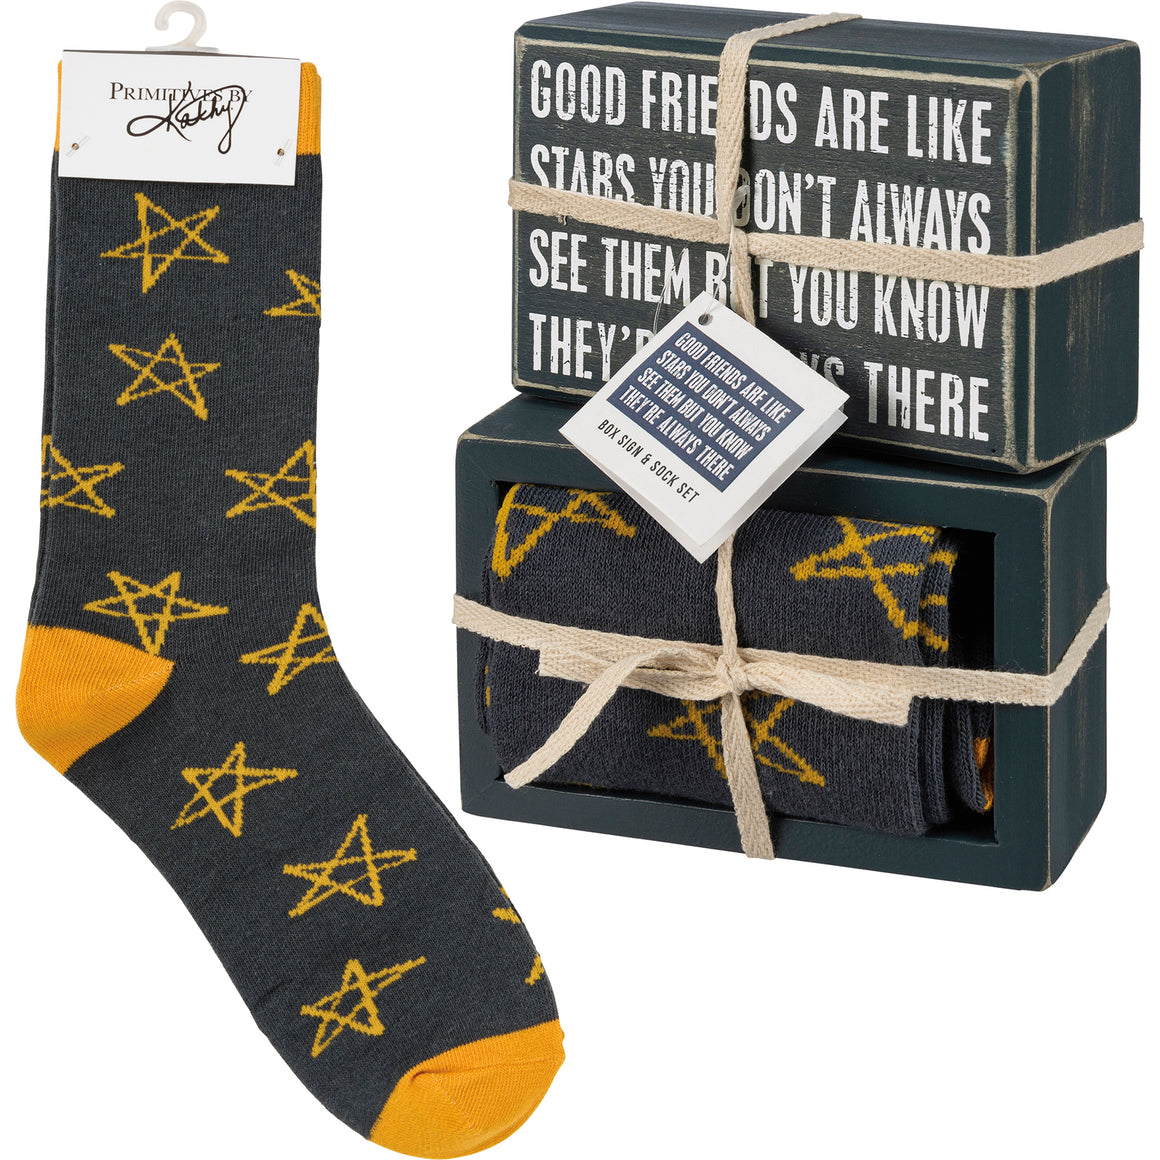 Good Friends Are Like Stars You Don't Always See Them But You Know They're Always There Socks & Box Sign Gift Set